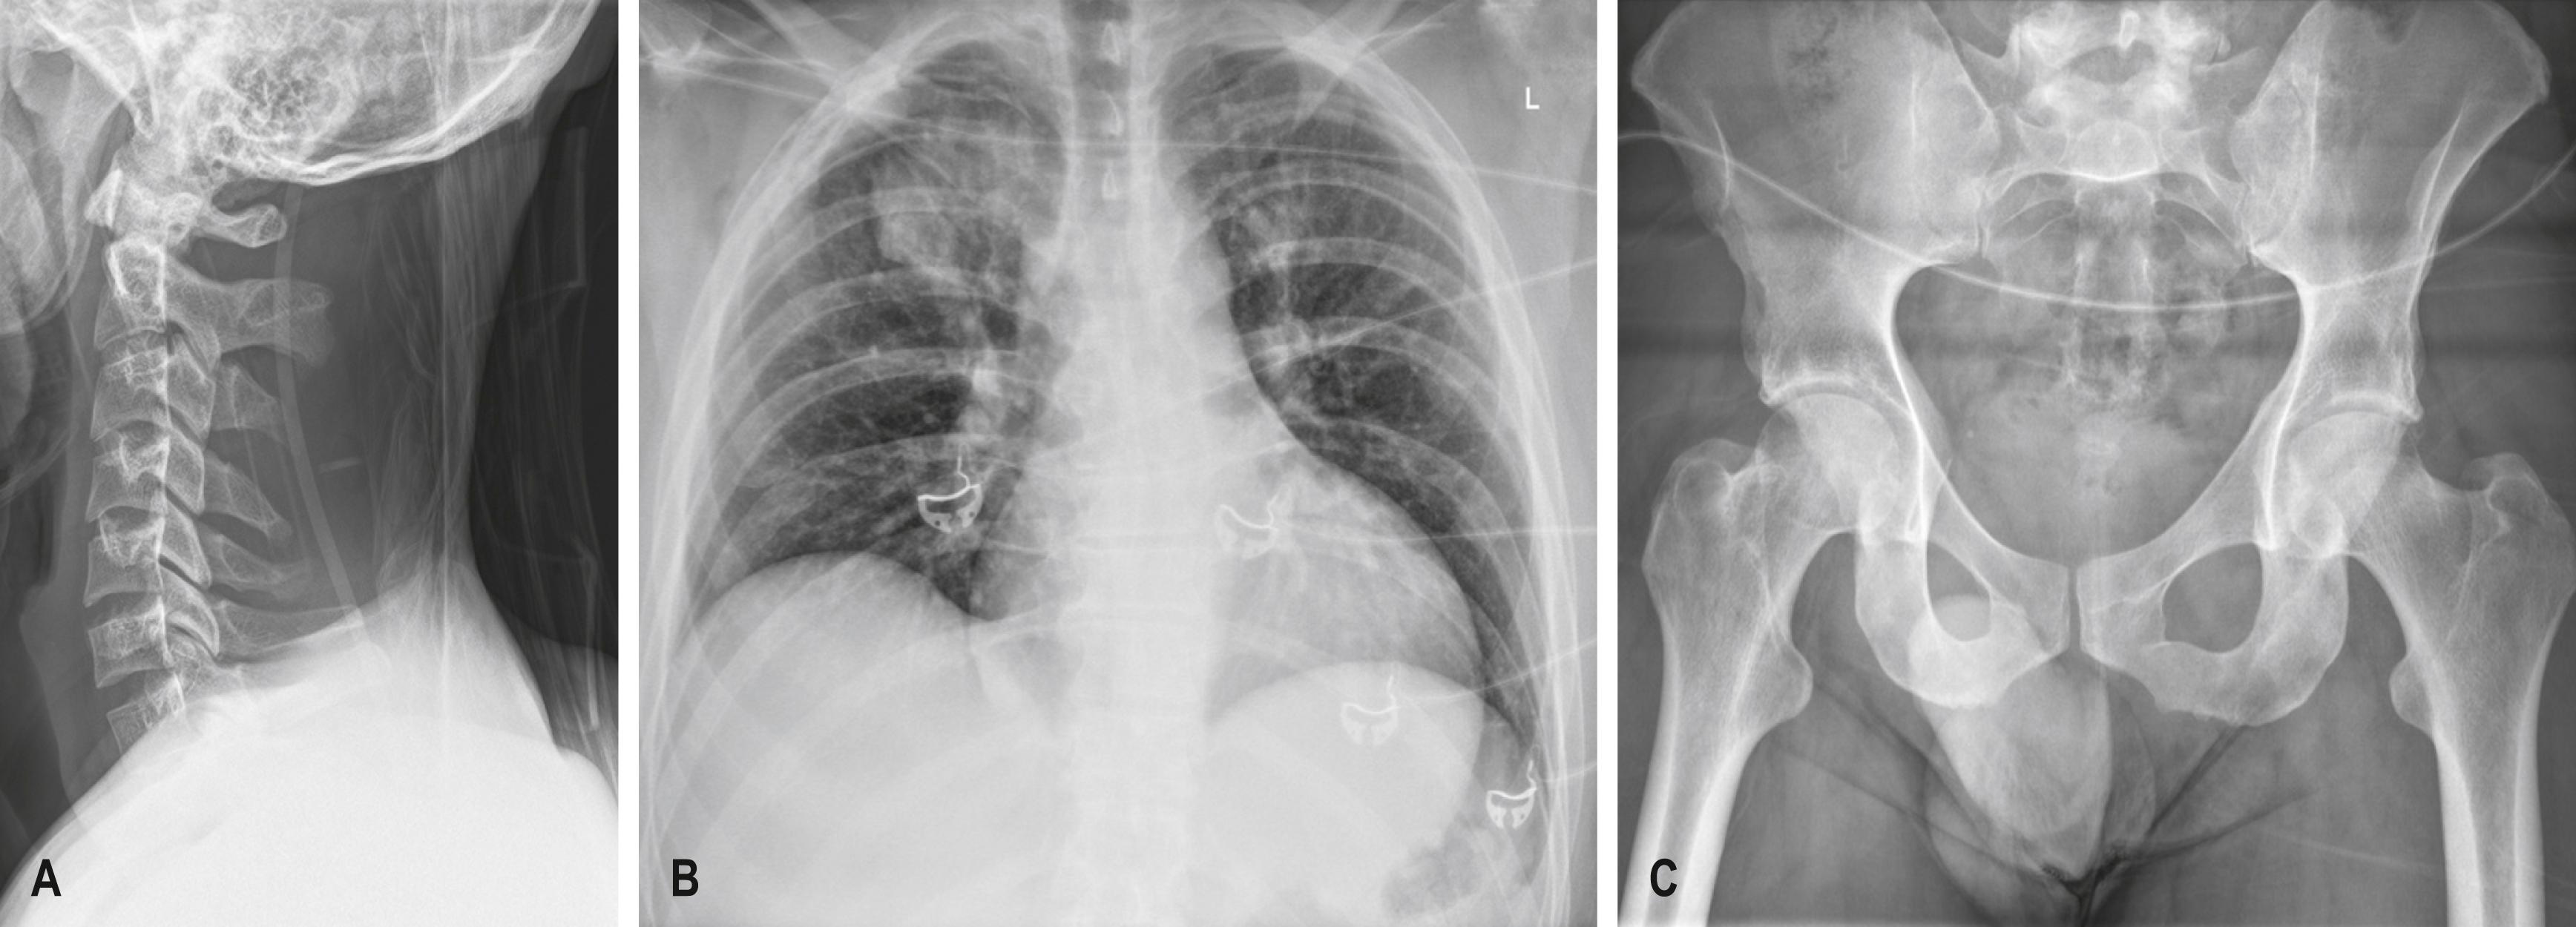 FIG. 3.8.1, (A) Normal lateral cervical radiograph from a trauma series. (B) Chest x-ray from a trauma series with right-upper-zone pulmonary contusion. (C) Normal pelvic x-ray from a trauma series.